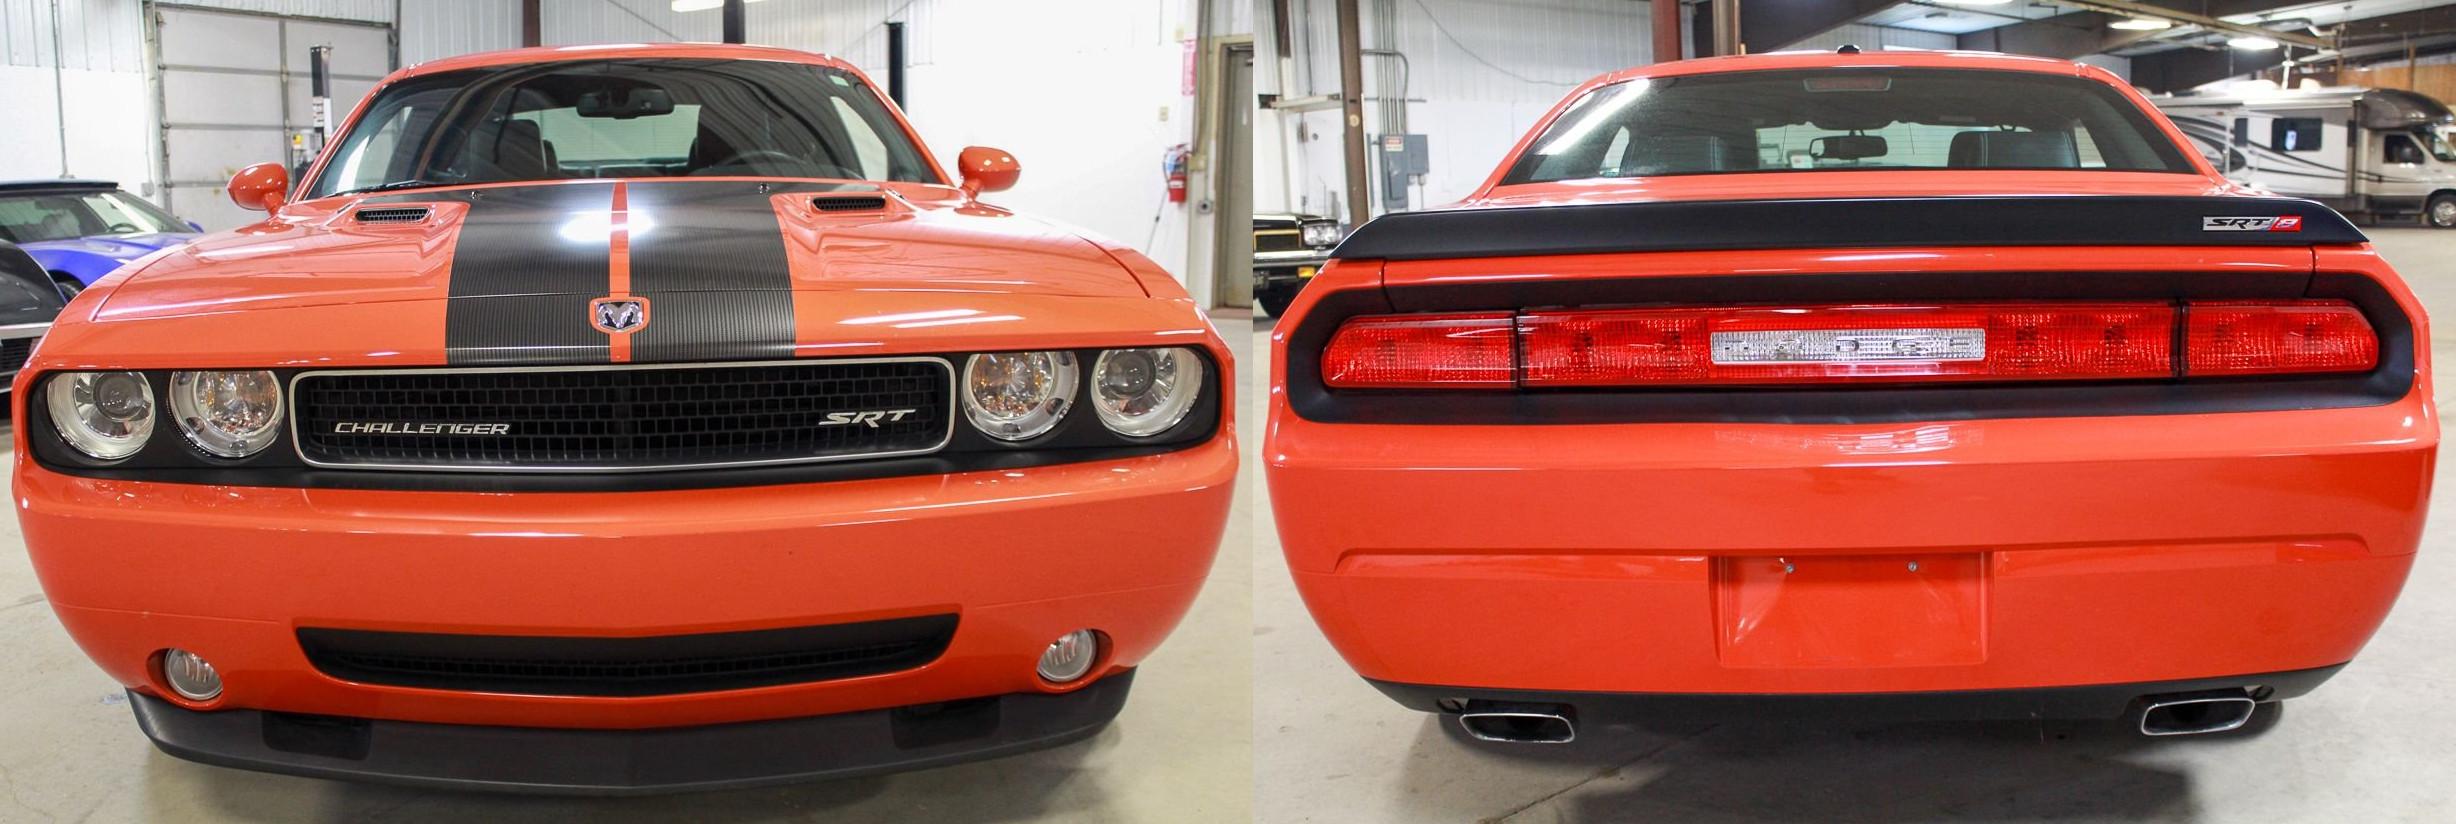 2008 Dodge Challenger SRT8 front and rear views